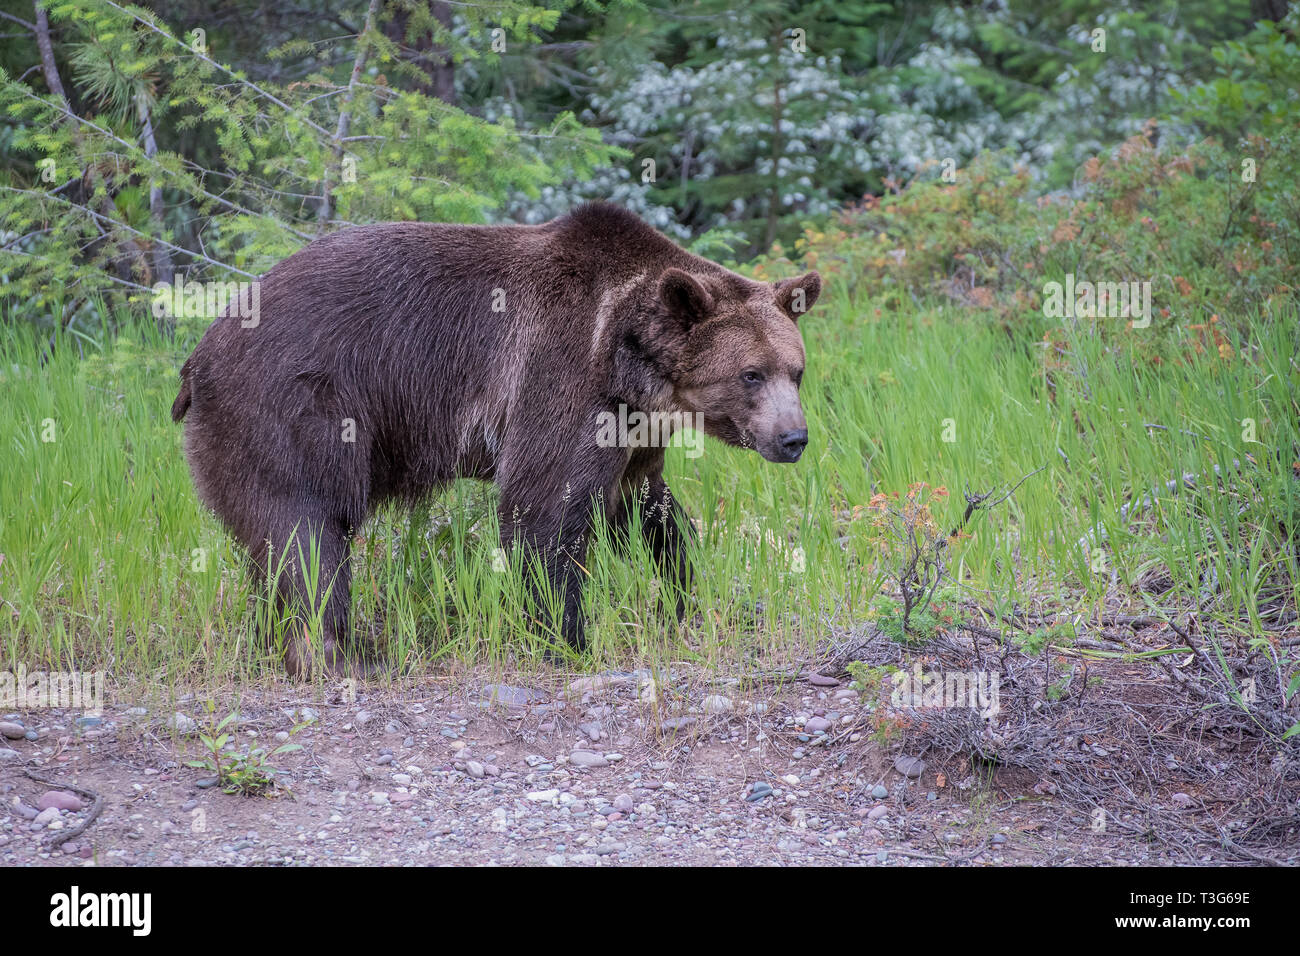 Wet Grizzly Bear Walking along the Edge of the Woods Stock Photo - Alamy